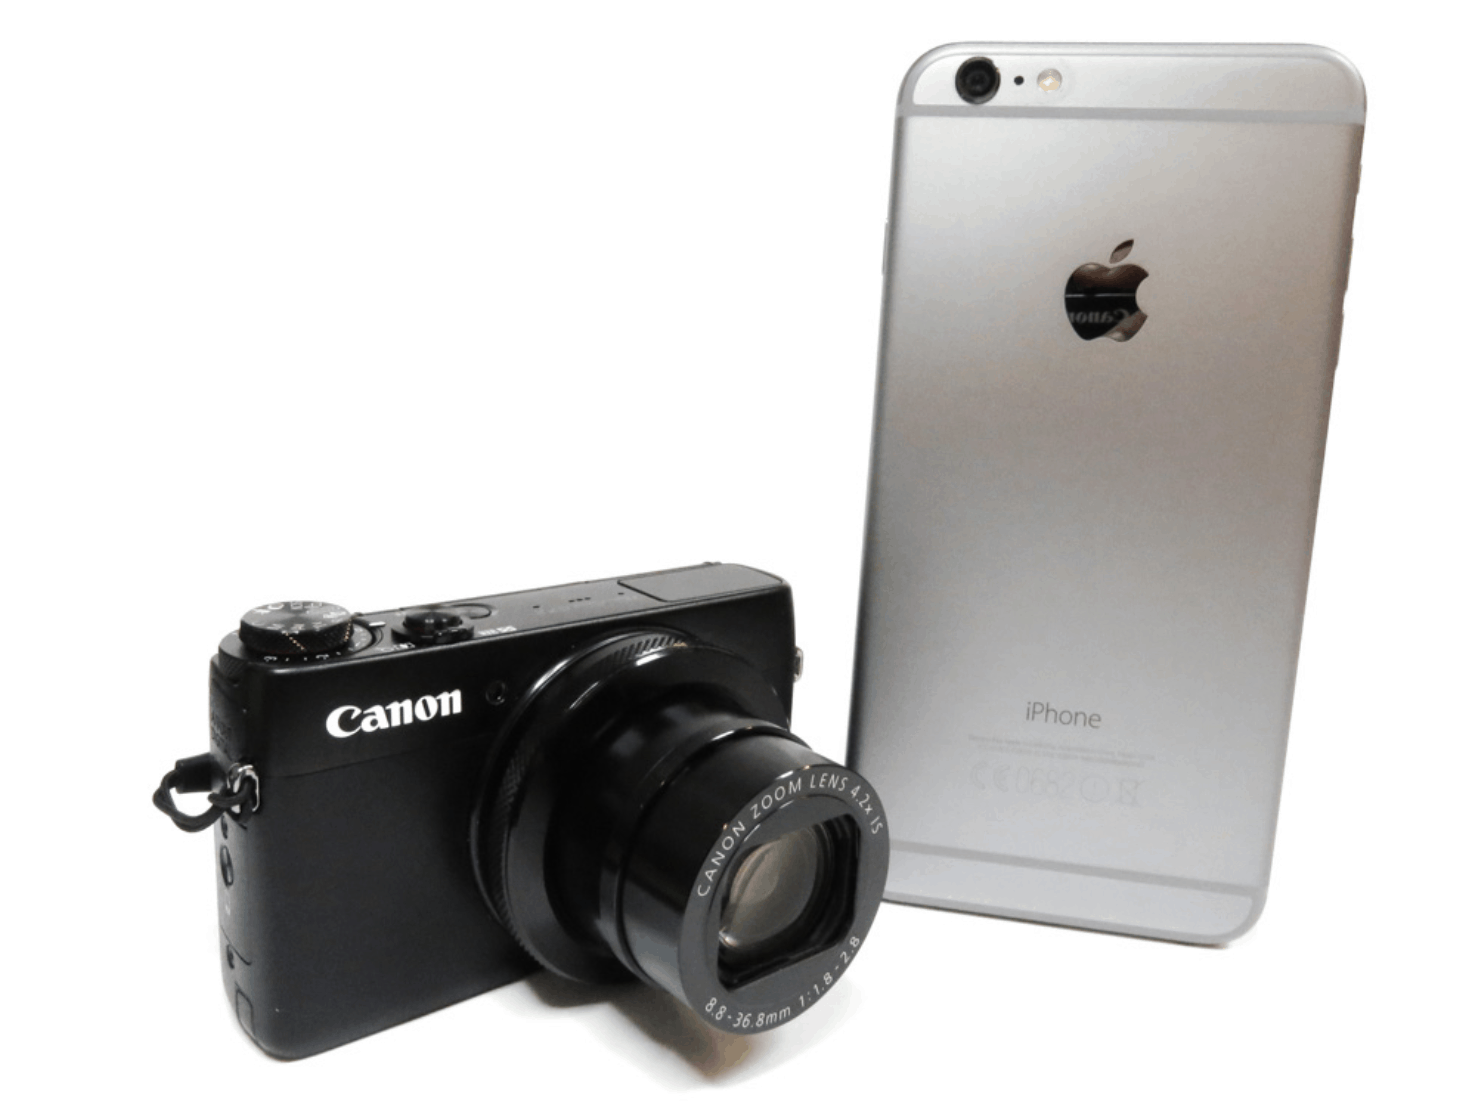 Canon G7X Mark 1 and an iPhone 7 plus 256gb